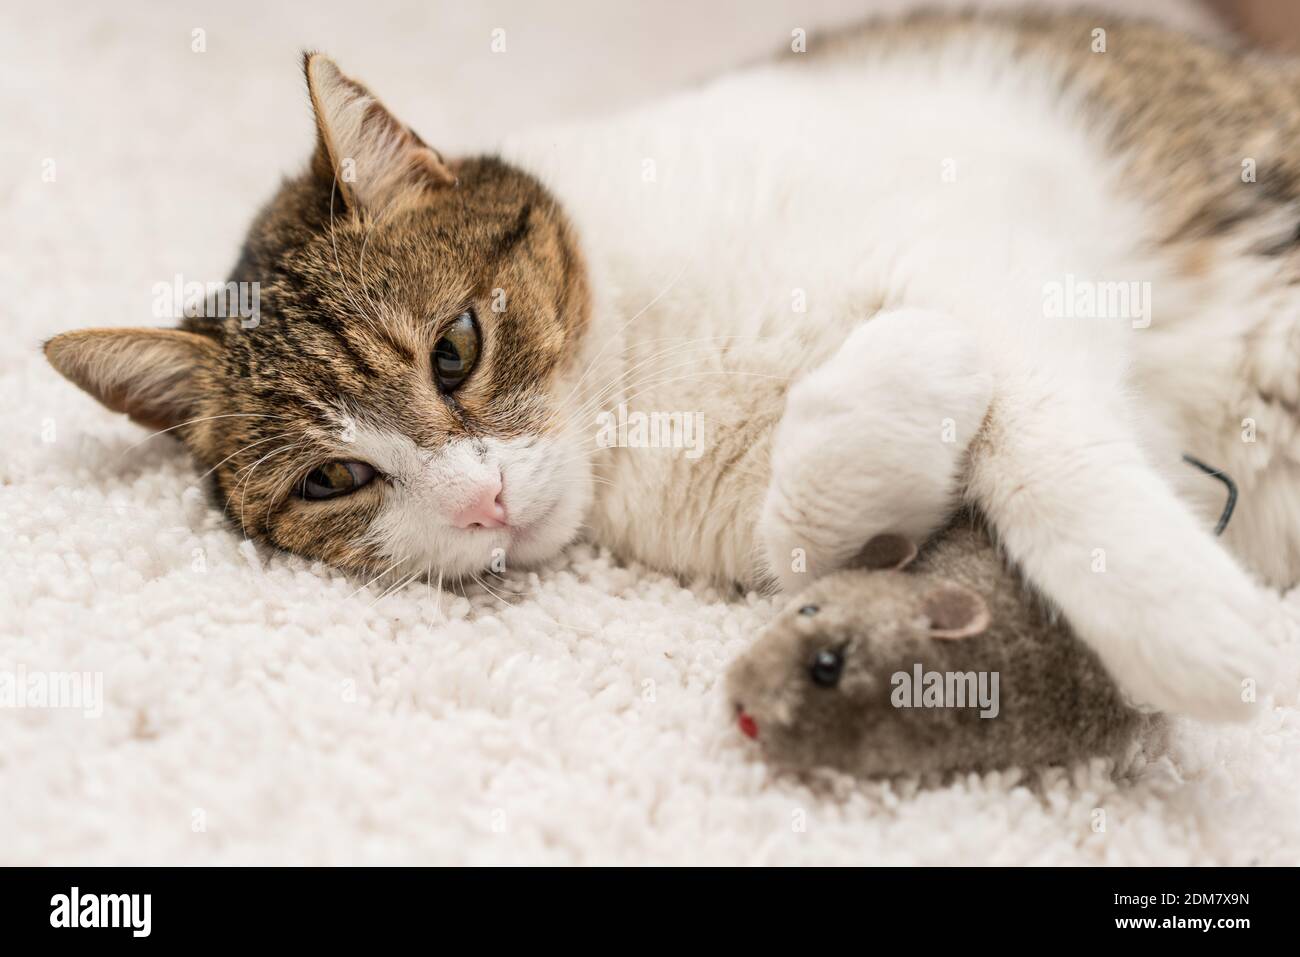 lazy cat sleeping with mouse Stock Photo